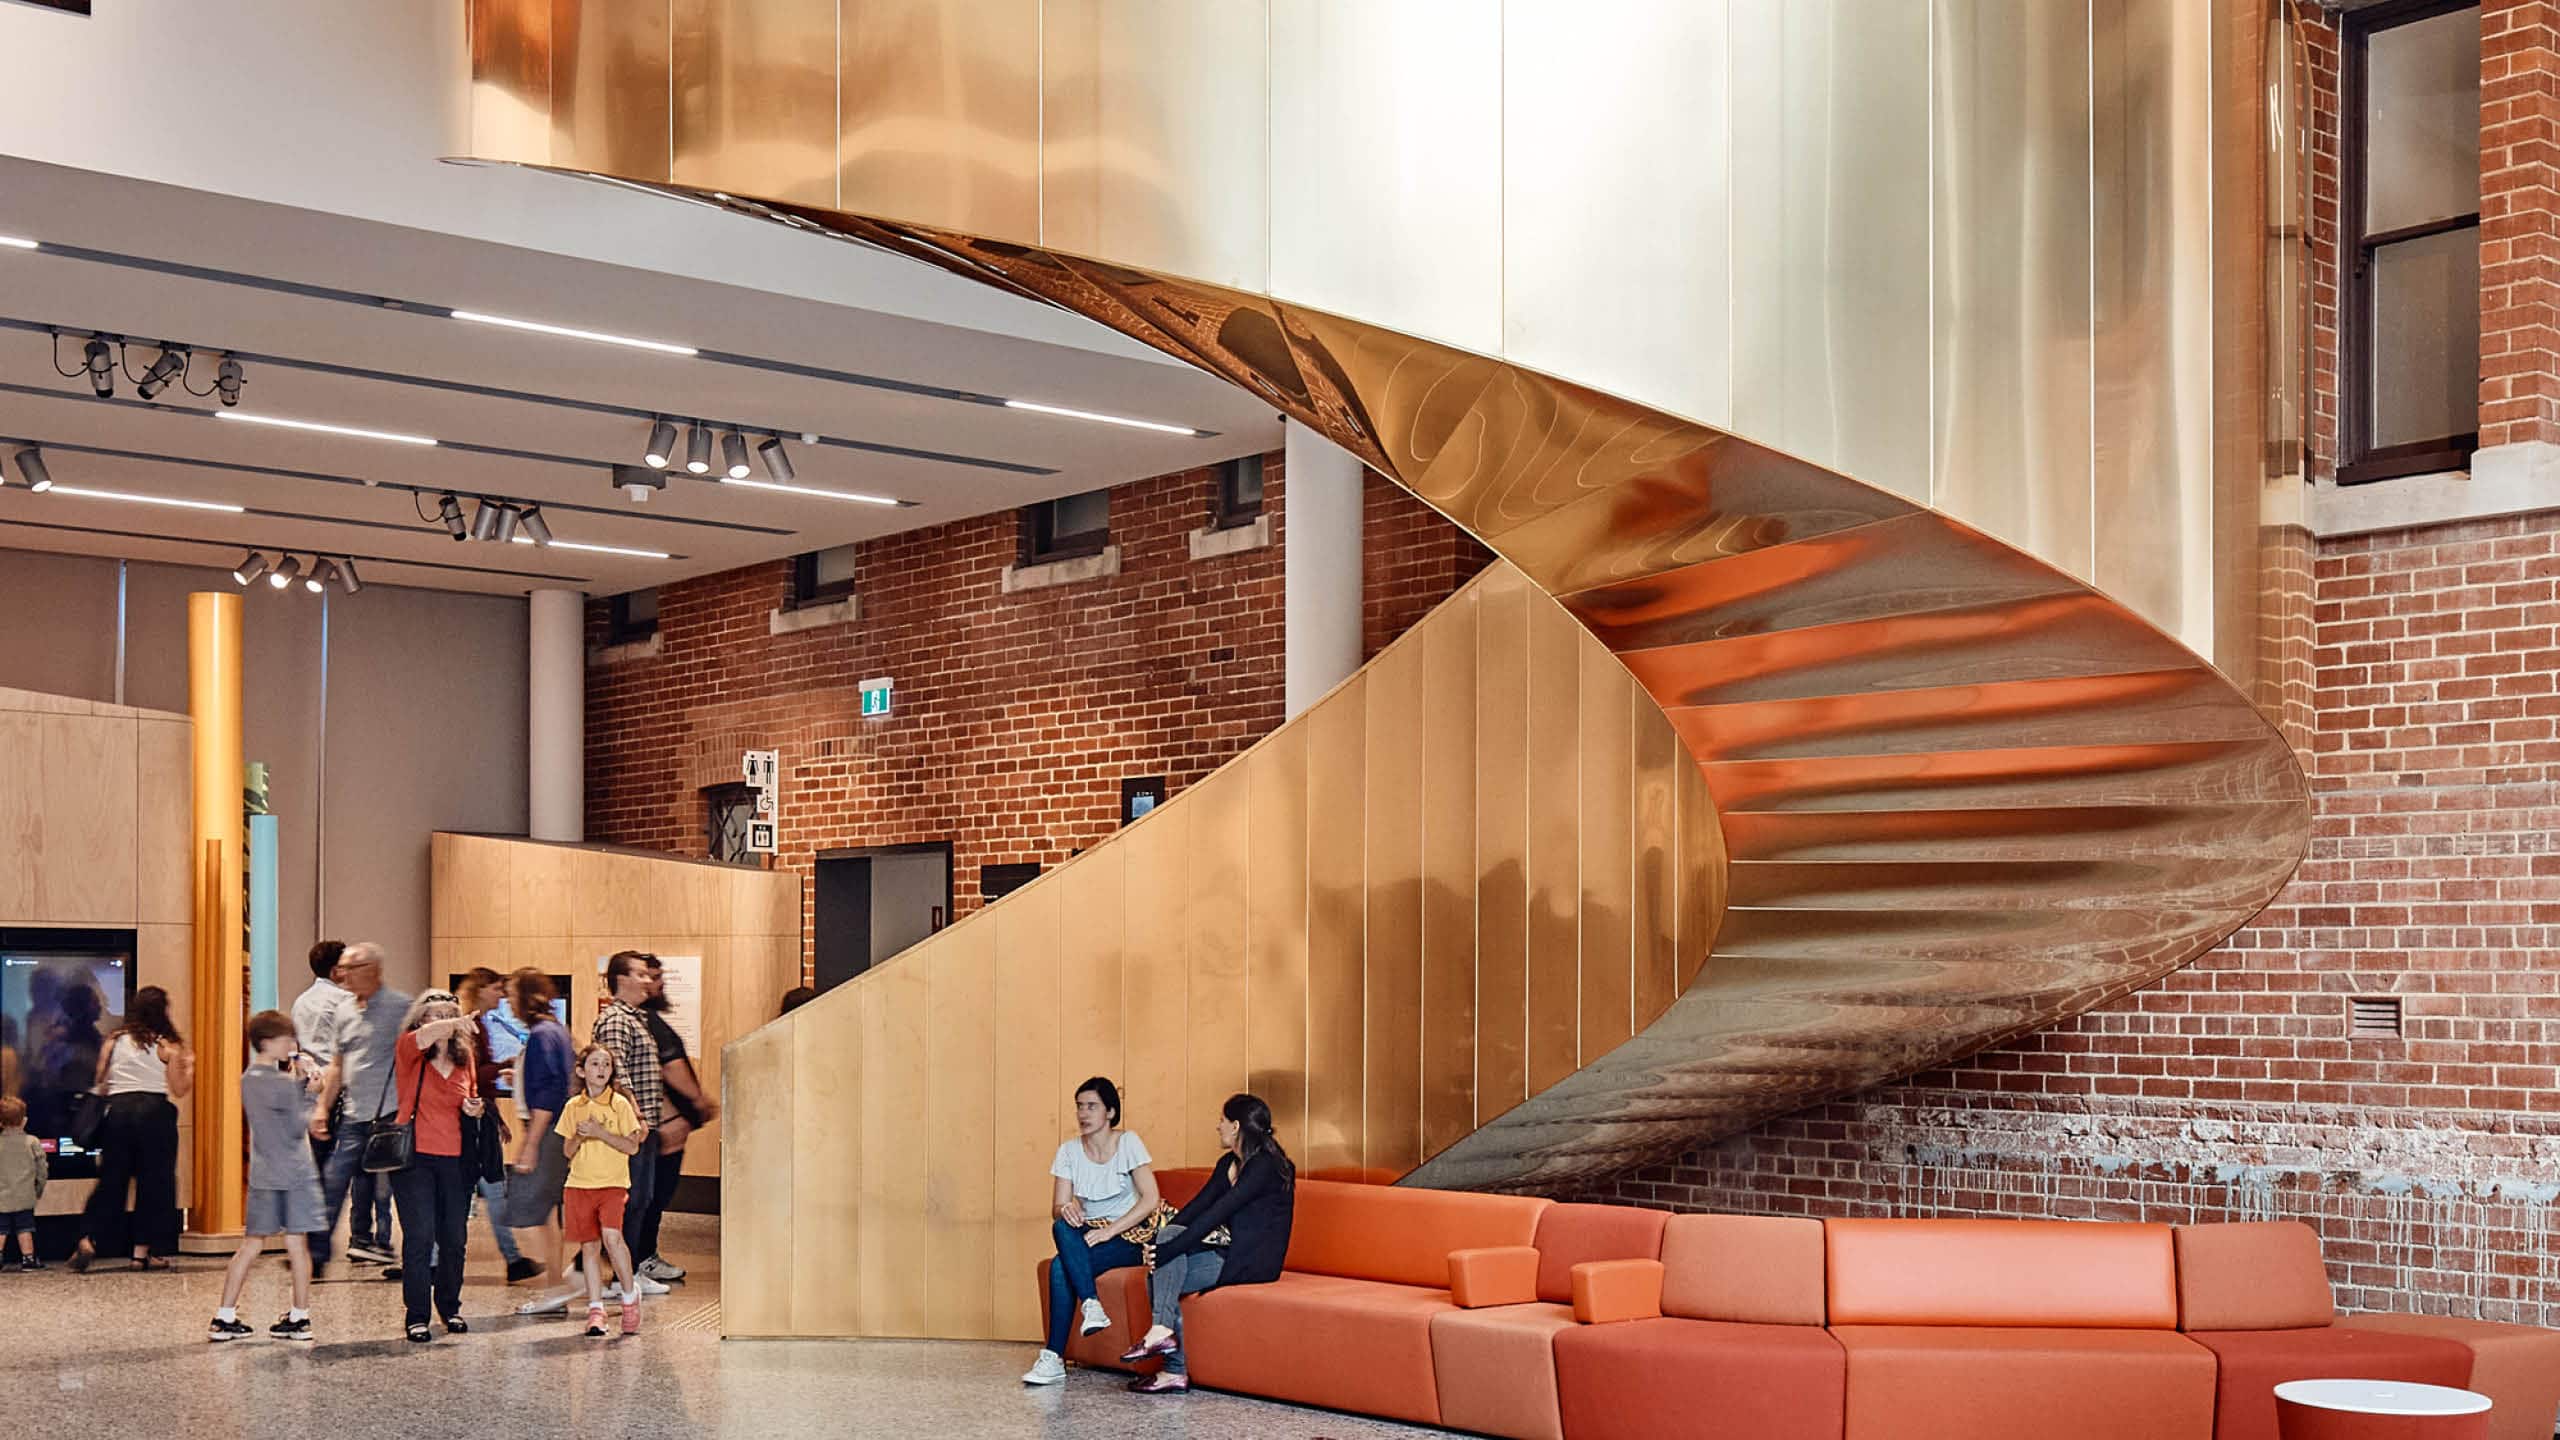 Three dramatic spiral staircases, clad in Nordic Brass copper alloy, announce intersecting looped pathways helping visitors to explore intuitively a new museum in Perth, Australia.